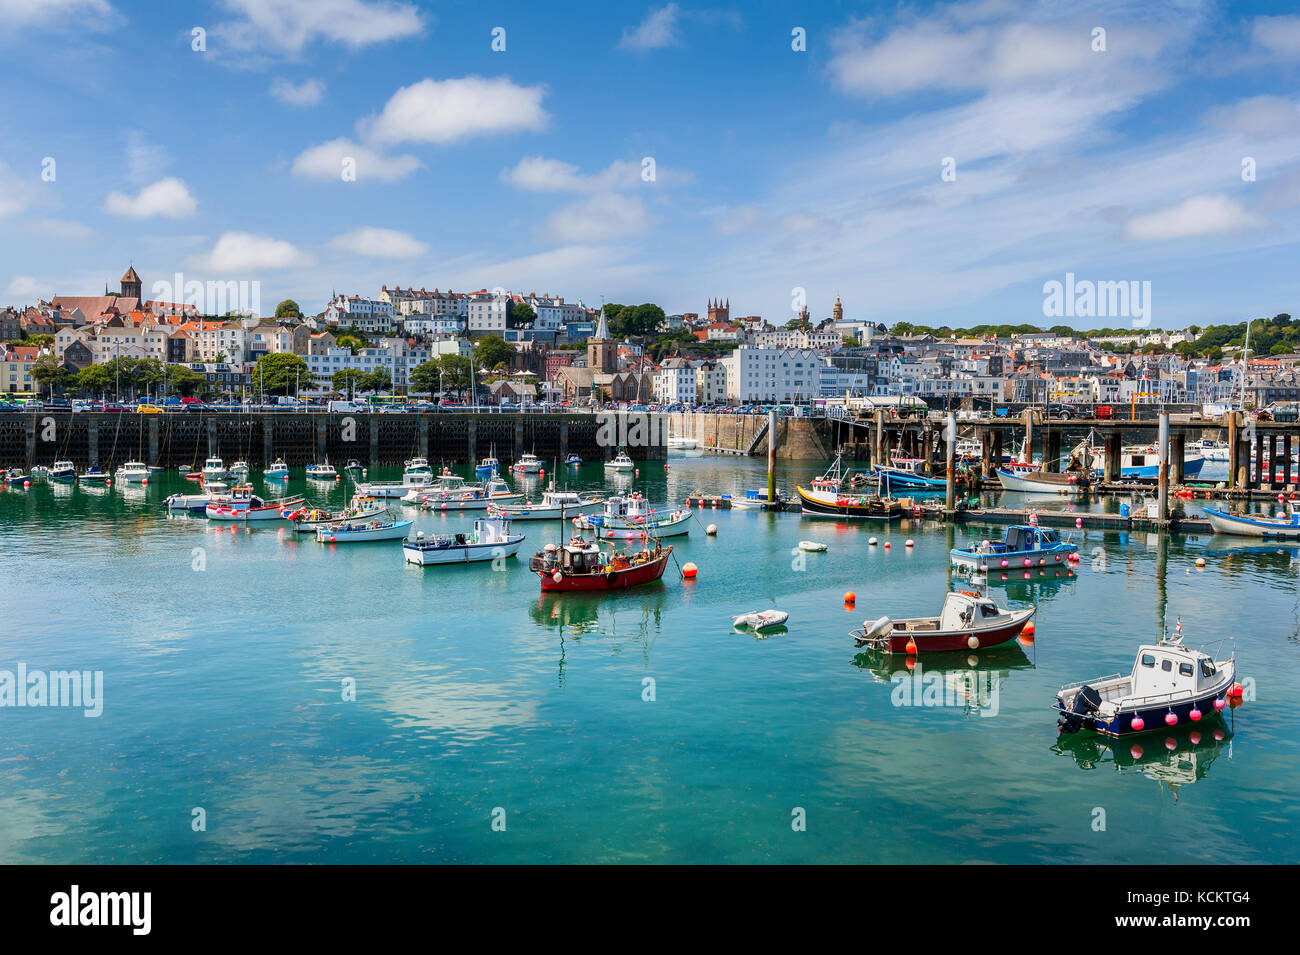 Harbor and Skyline of Saint Peter Port, Guernsey, Channel Islands, UK Stock Photo